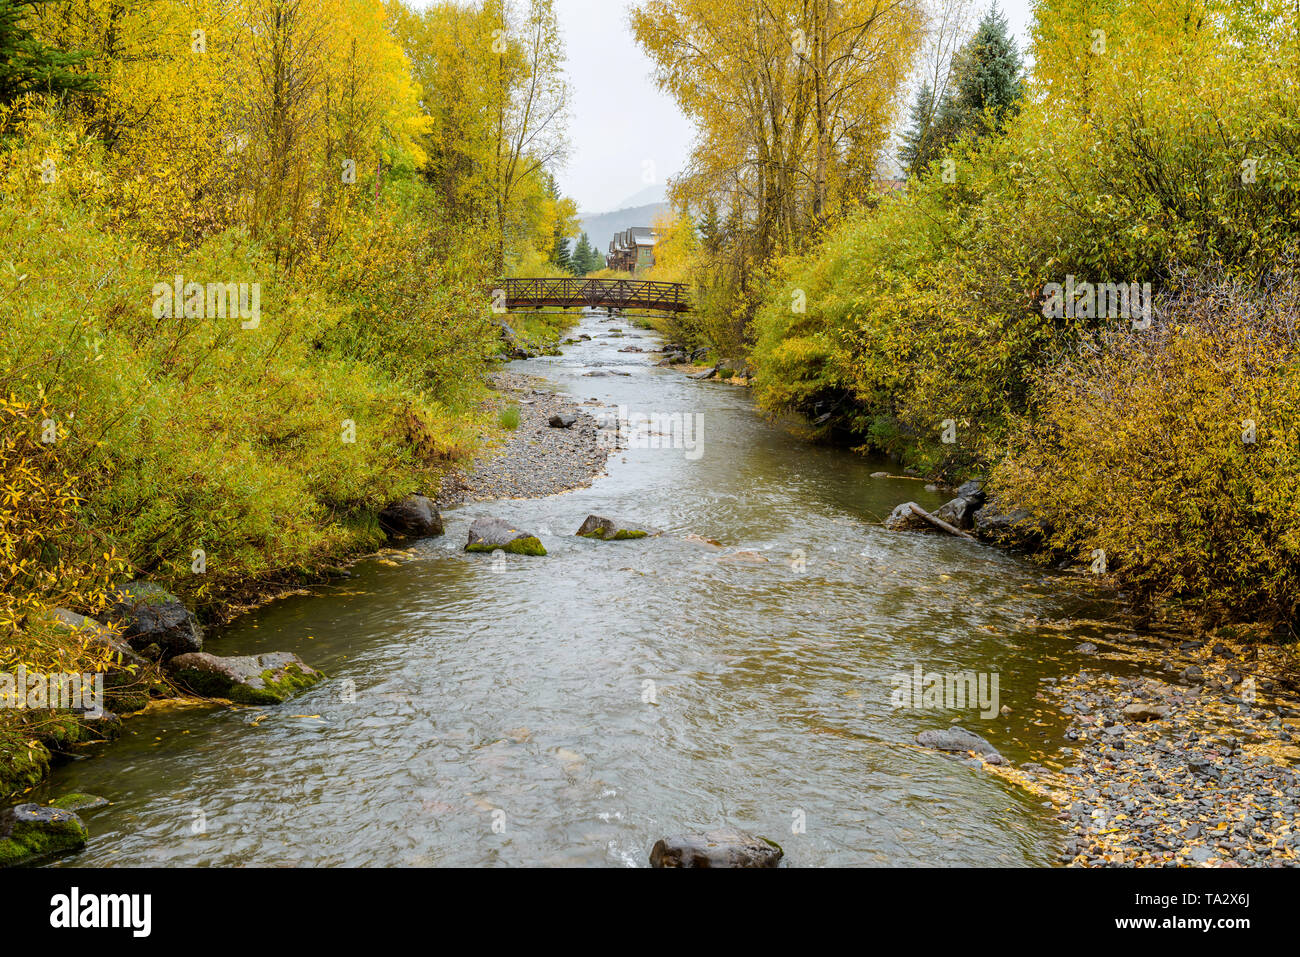 San Miguel River - Autumn view of San Miguel River in the town of Telluride, Colorado, USA. Stock Photo